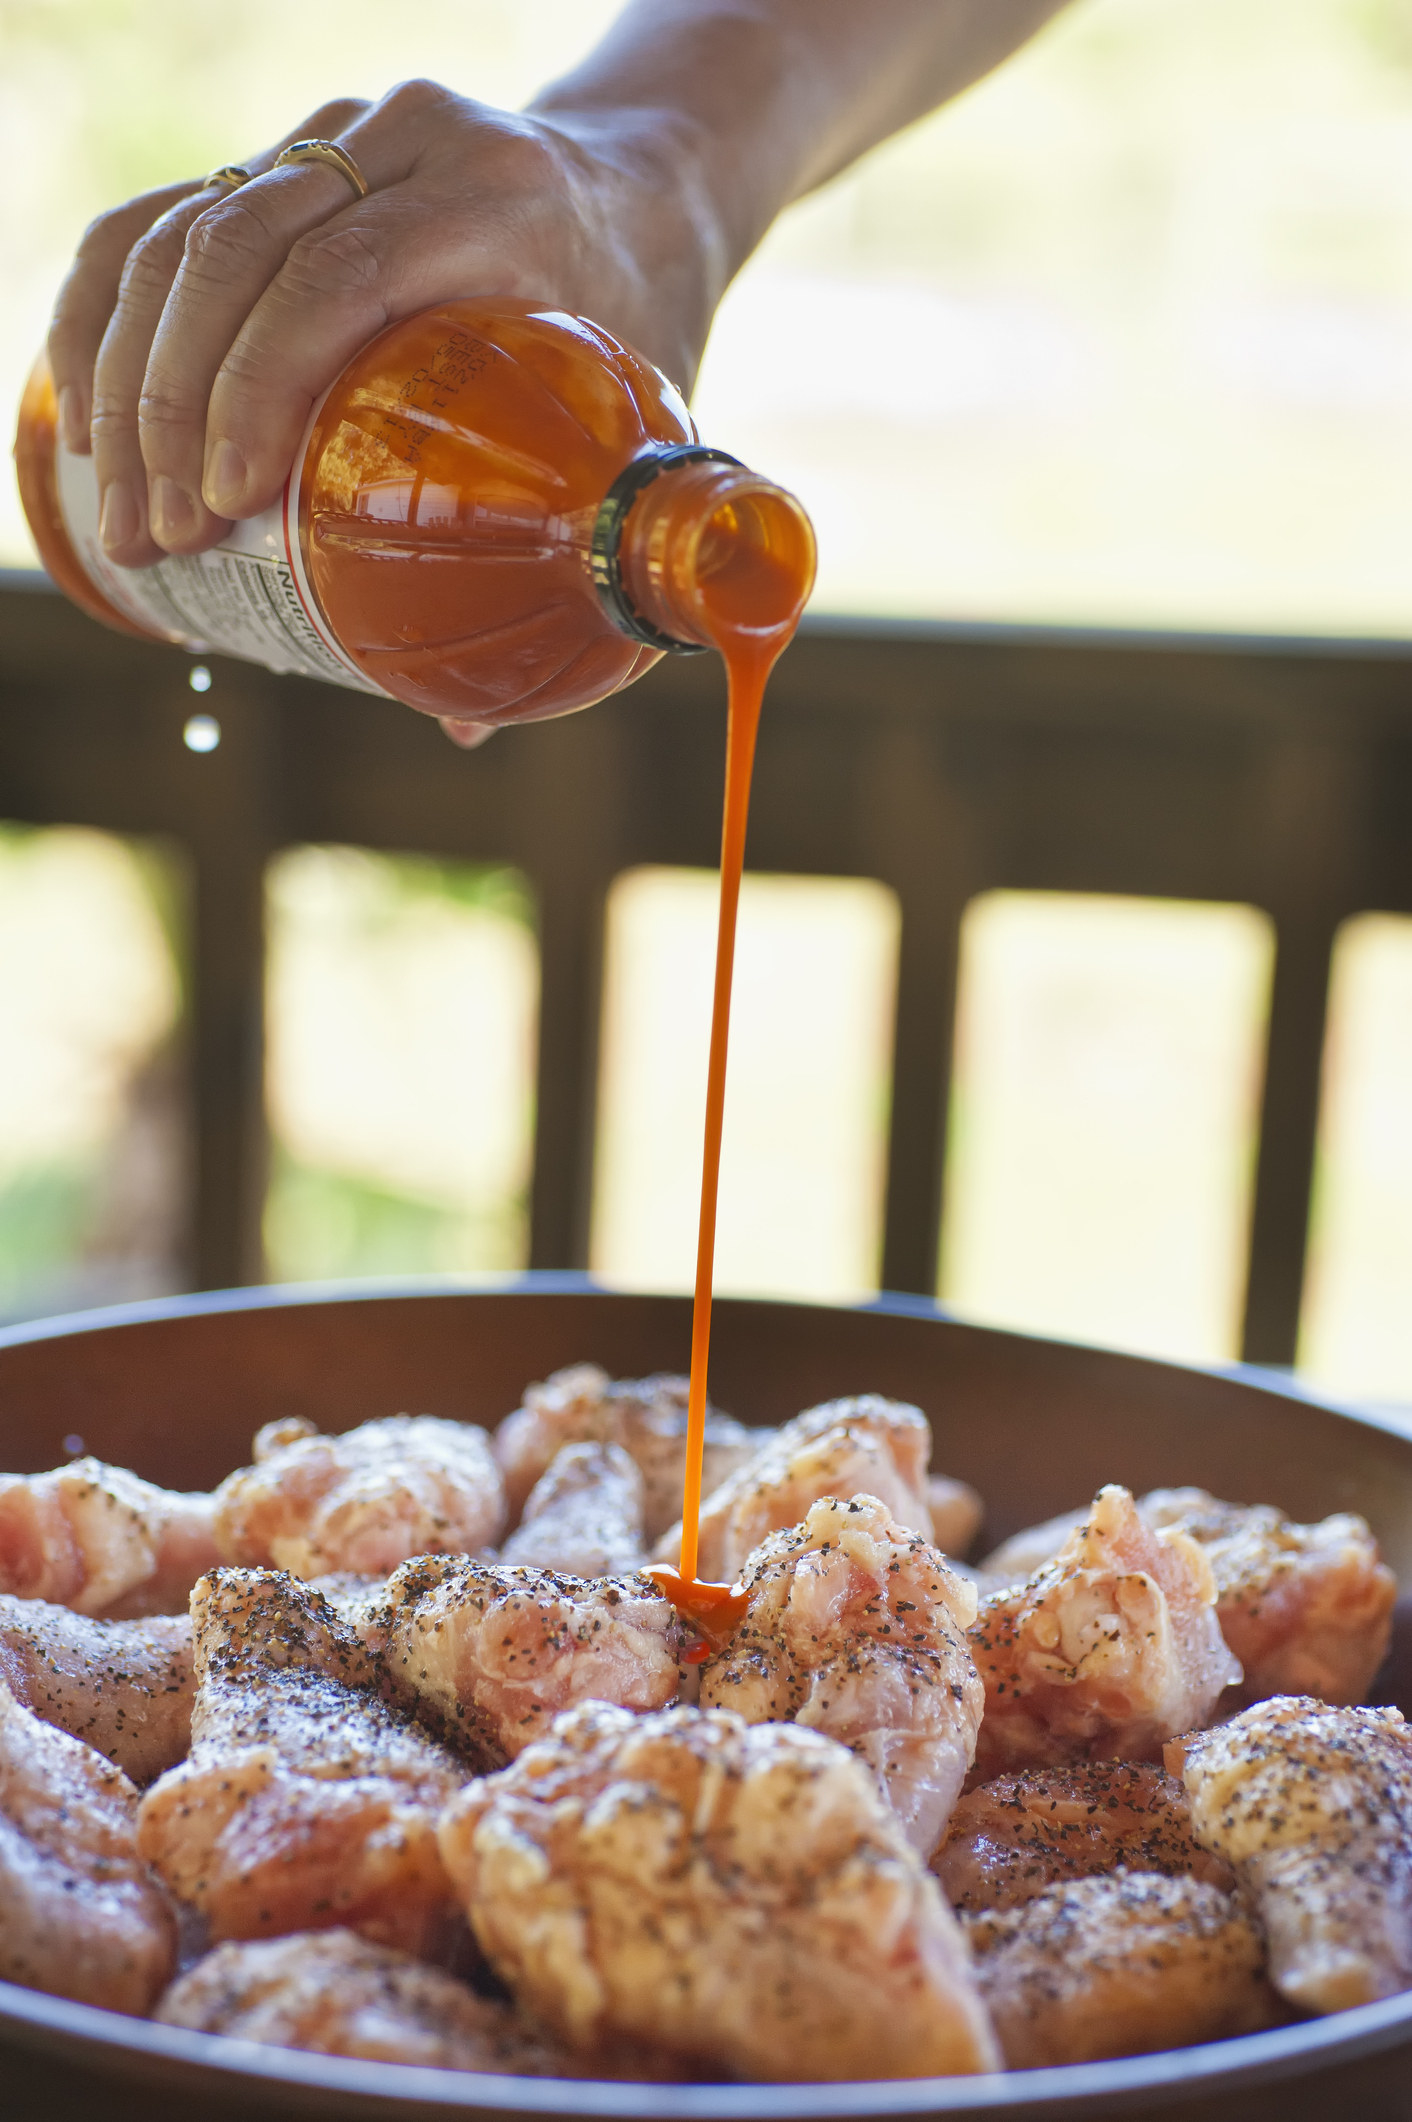 Pouring hot sauce onto chicken wings.